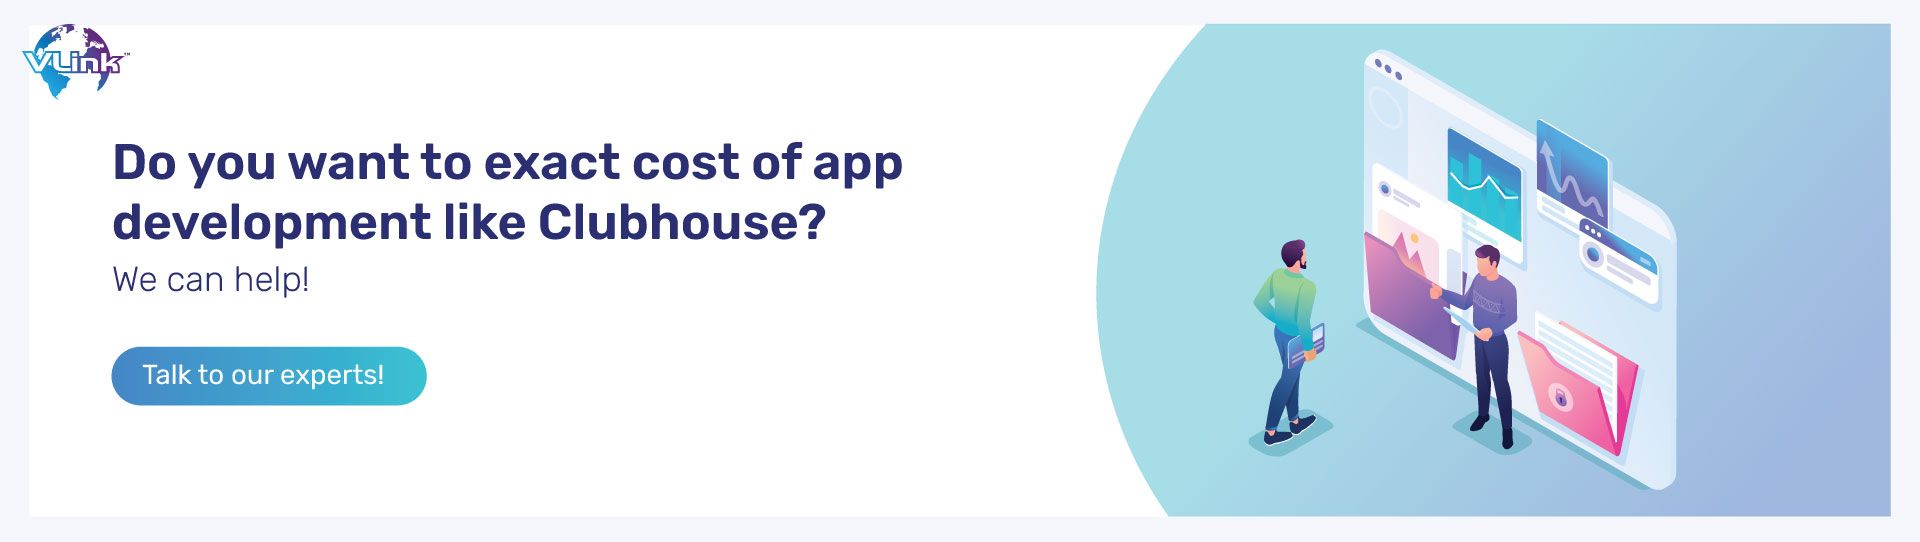 Do you want to exact cost of app development like clunhouse